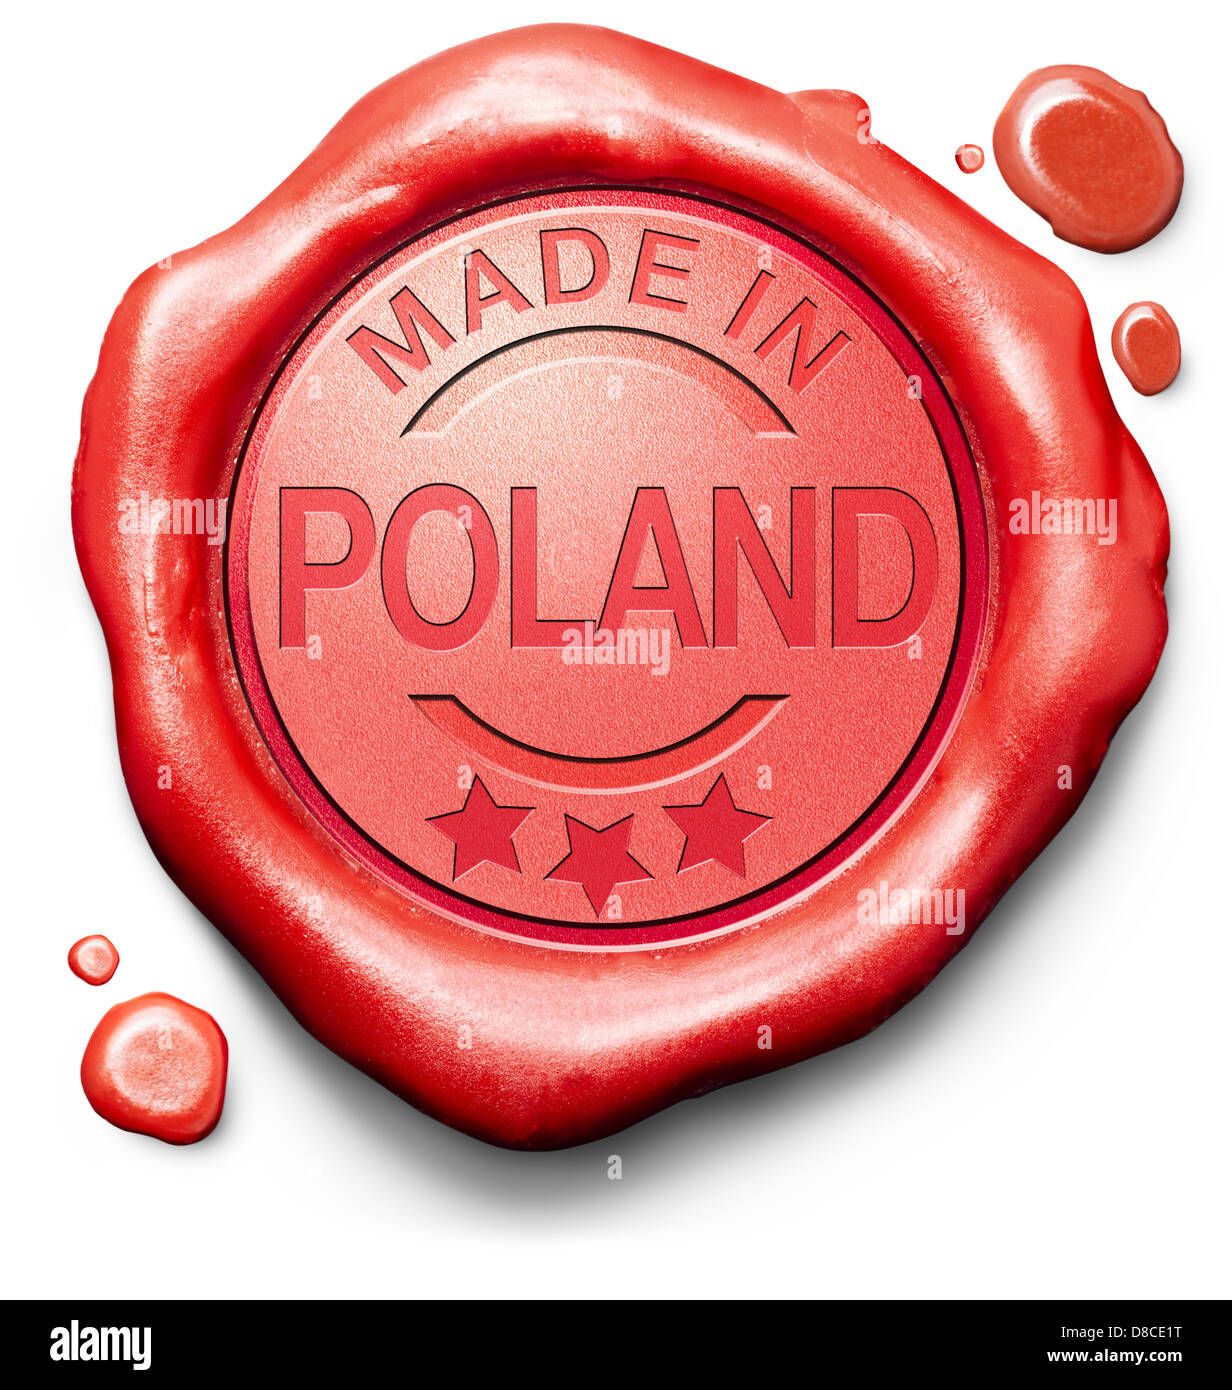 made in Poland original product buy local buy authentic Polish quality label red wax stamp seal Stock Photo